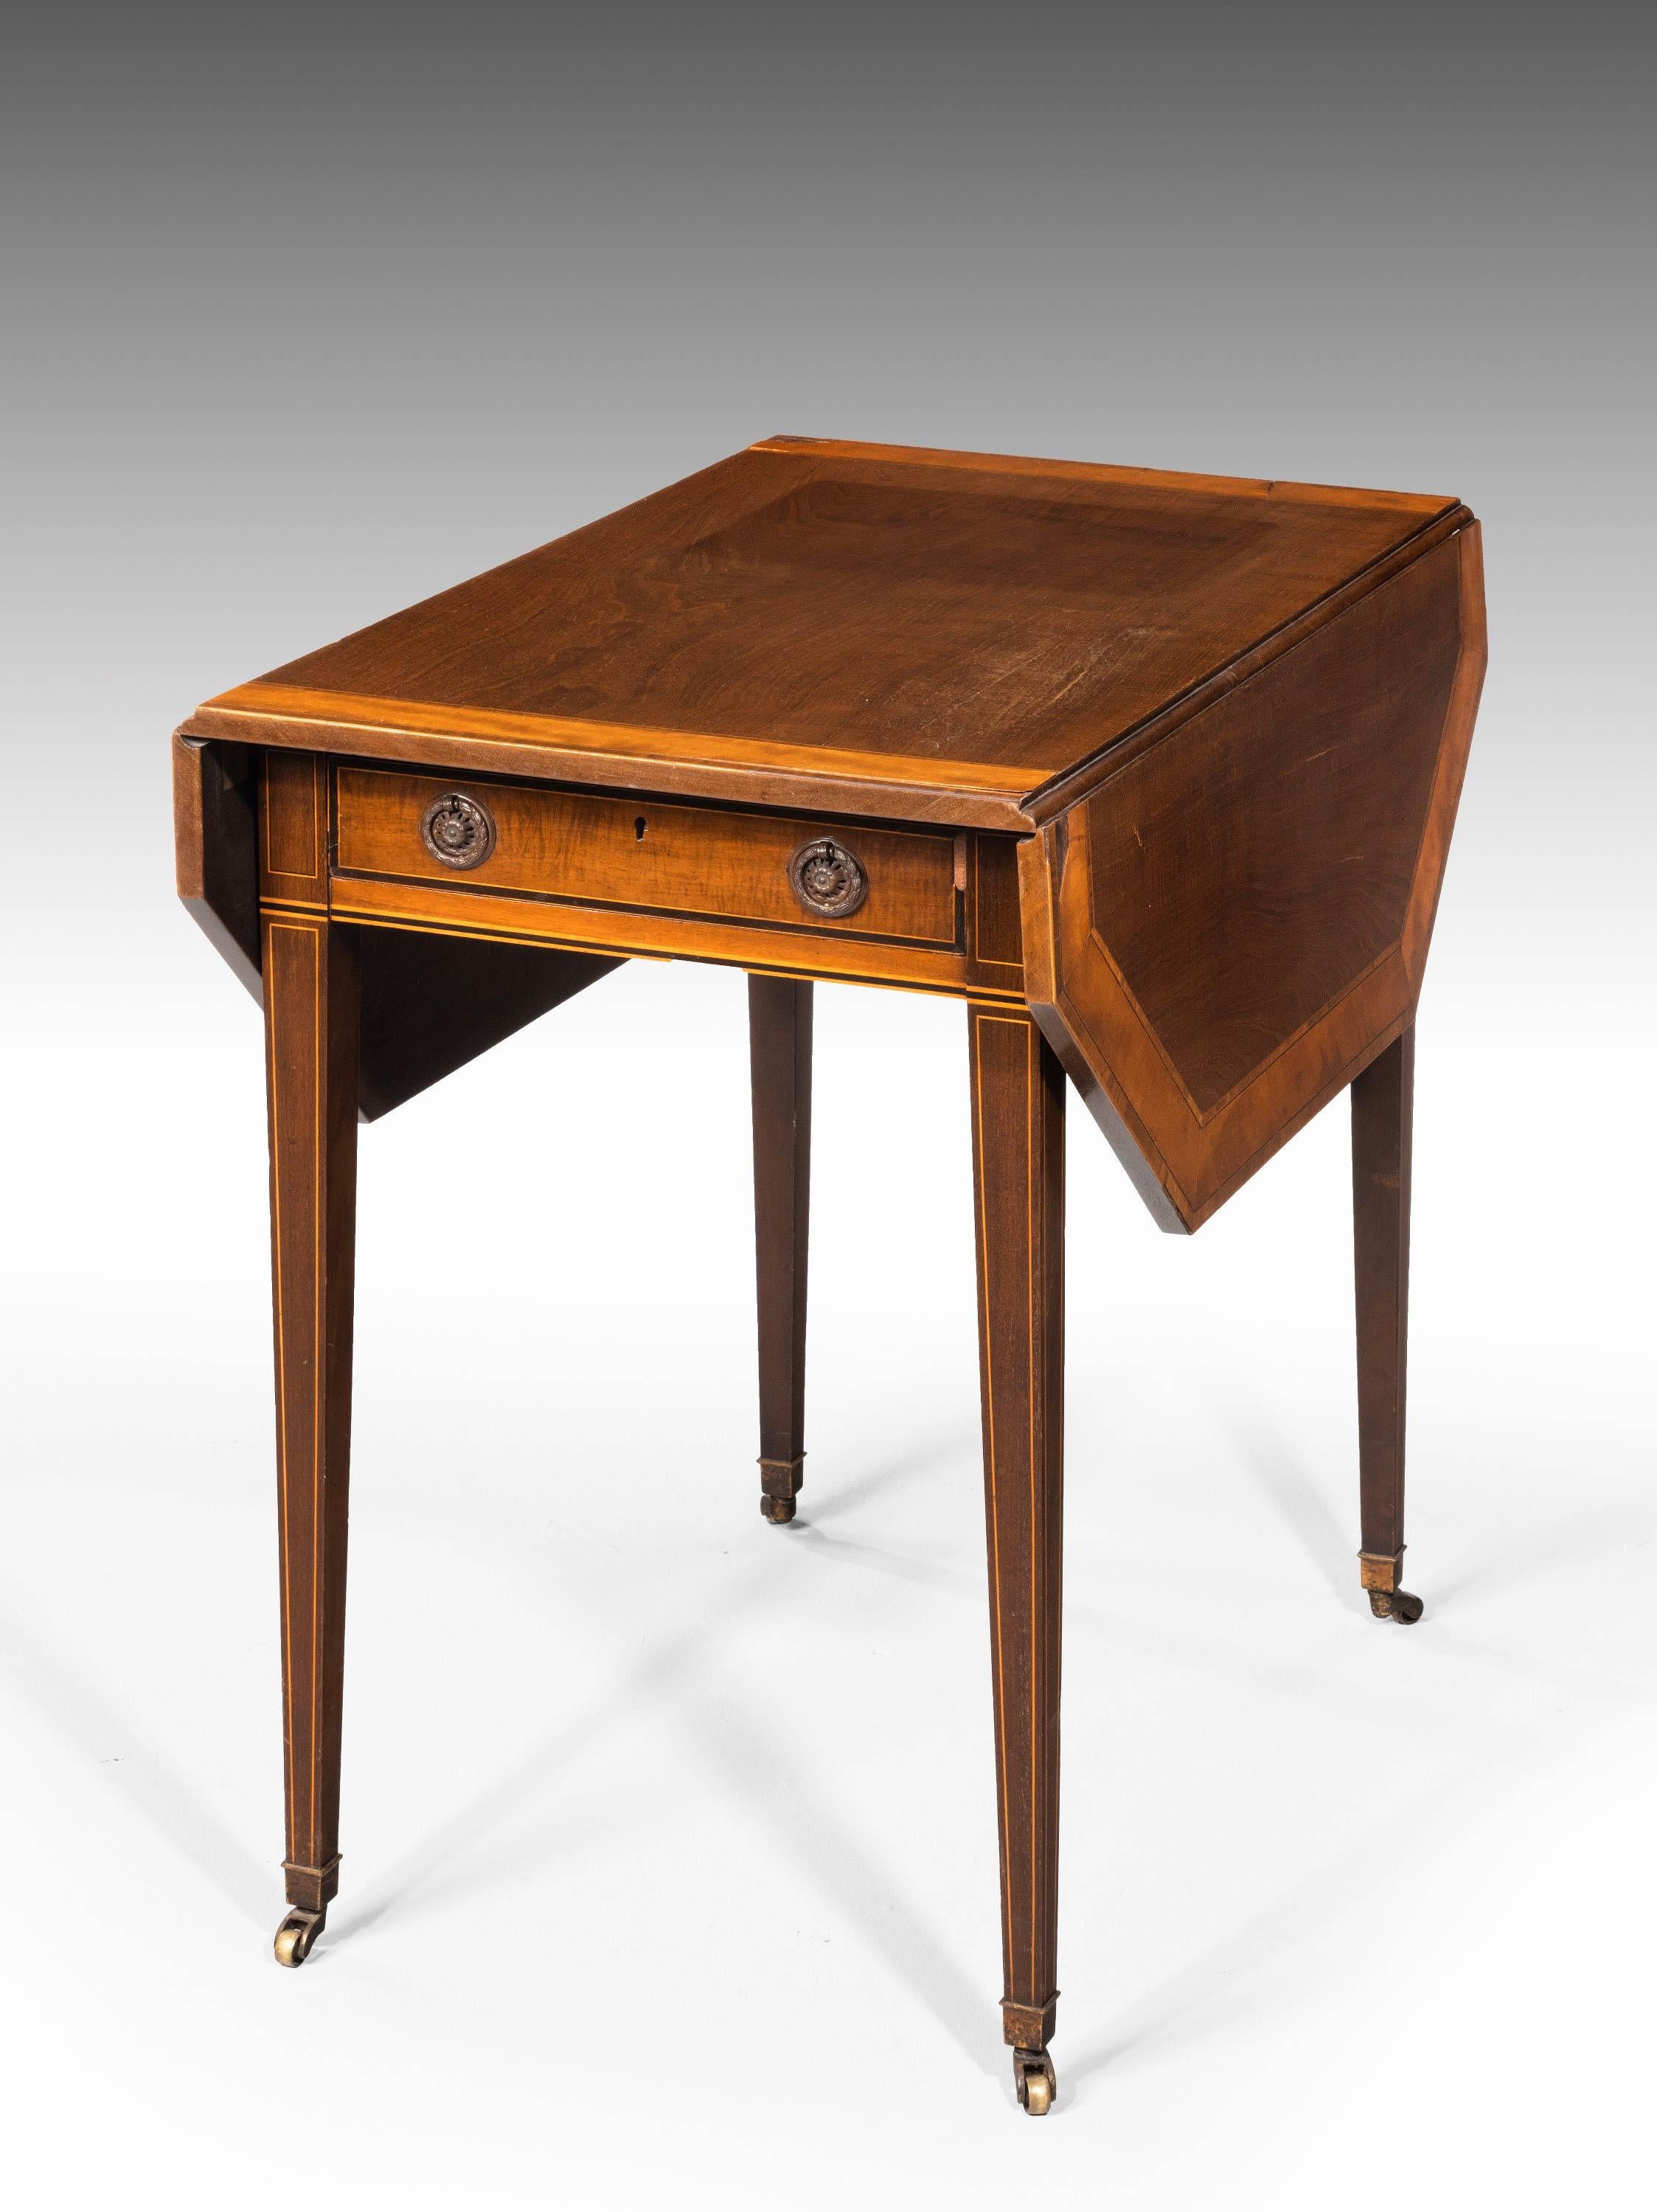 18th Century Pair of George III Period Mahogany Pembroke Tables by Gillows of Lancaster